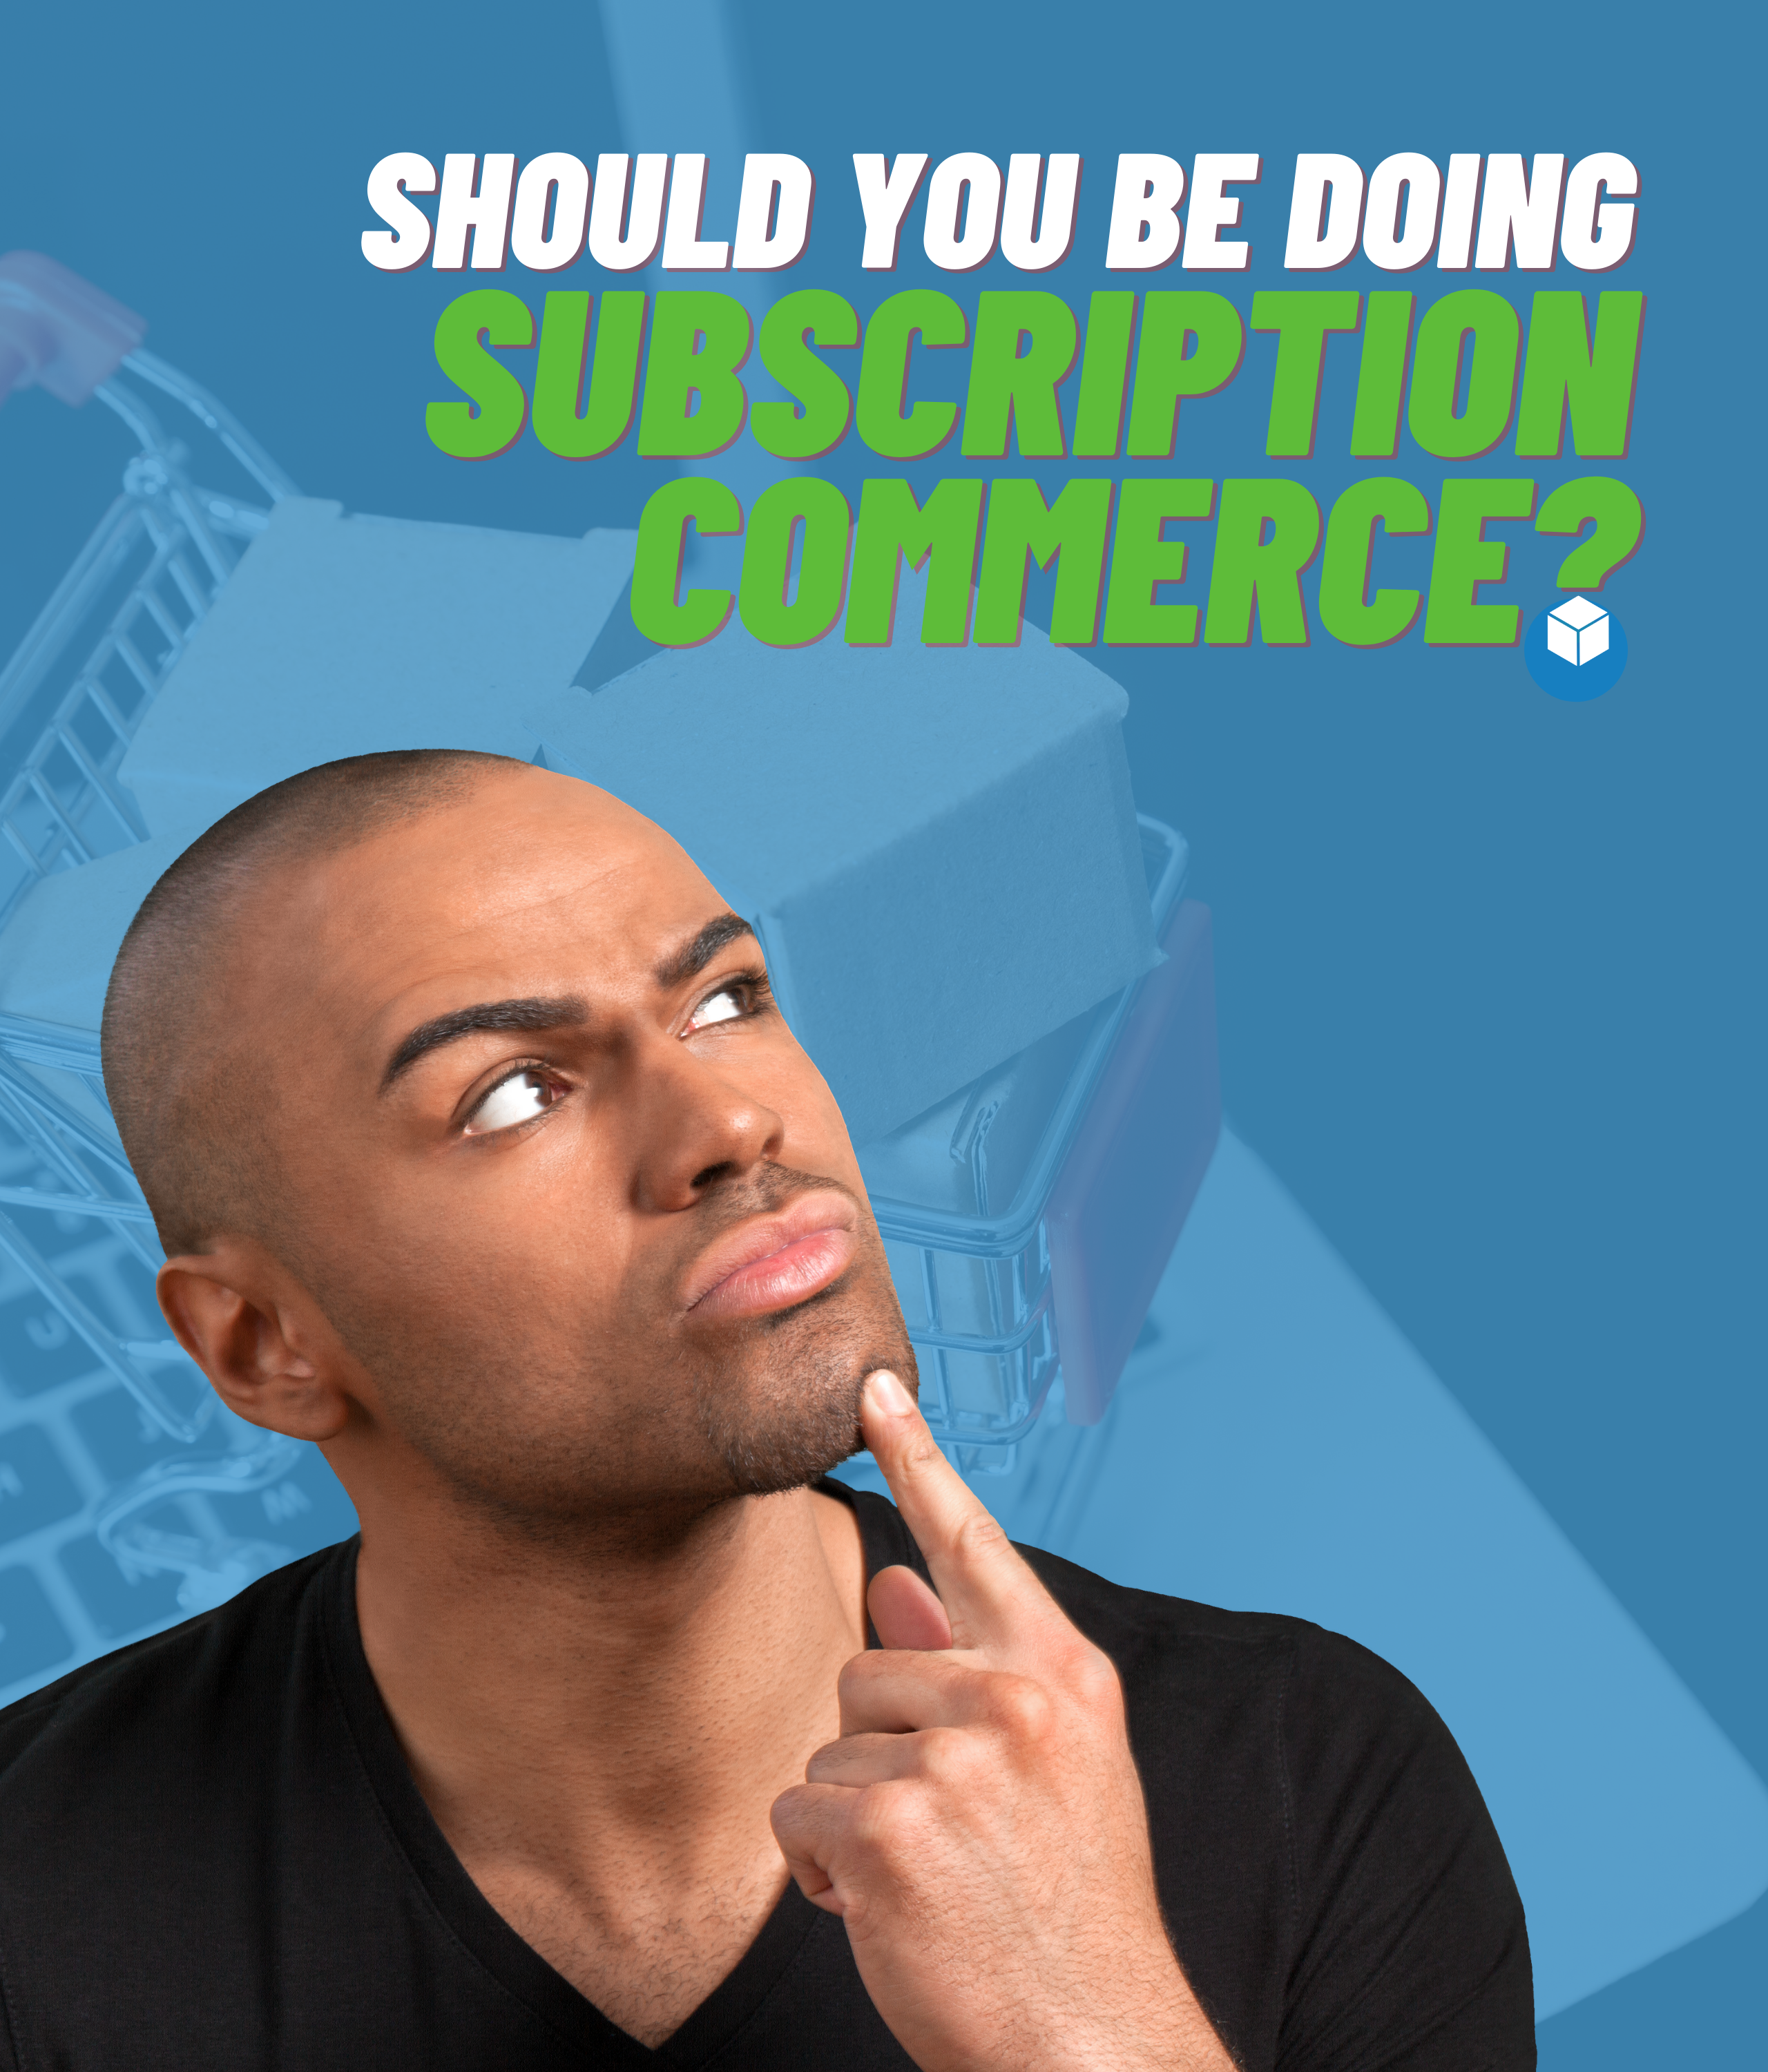 Should you be doing subscription commerce?